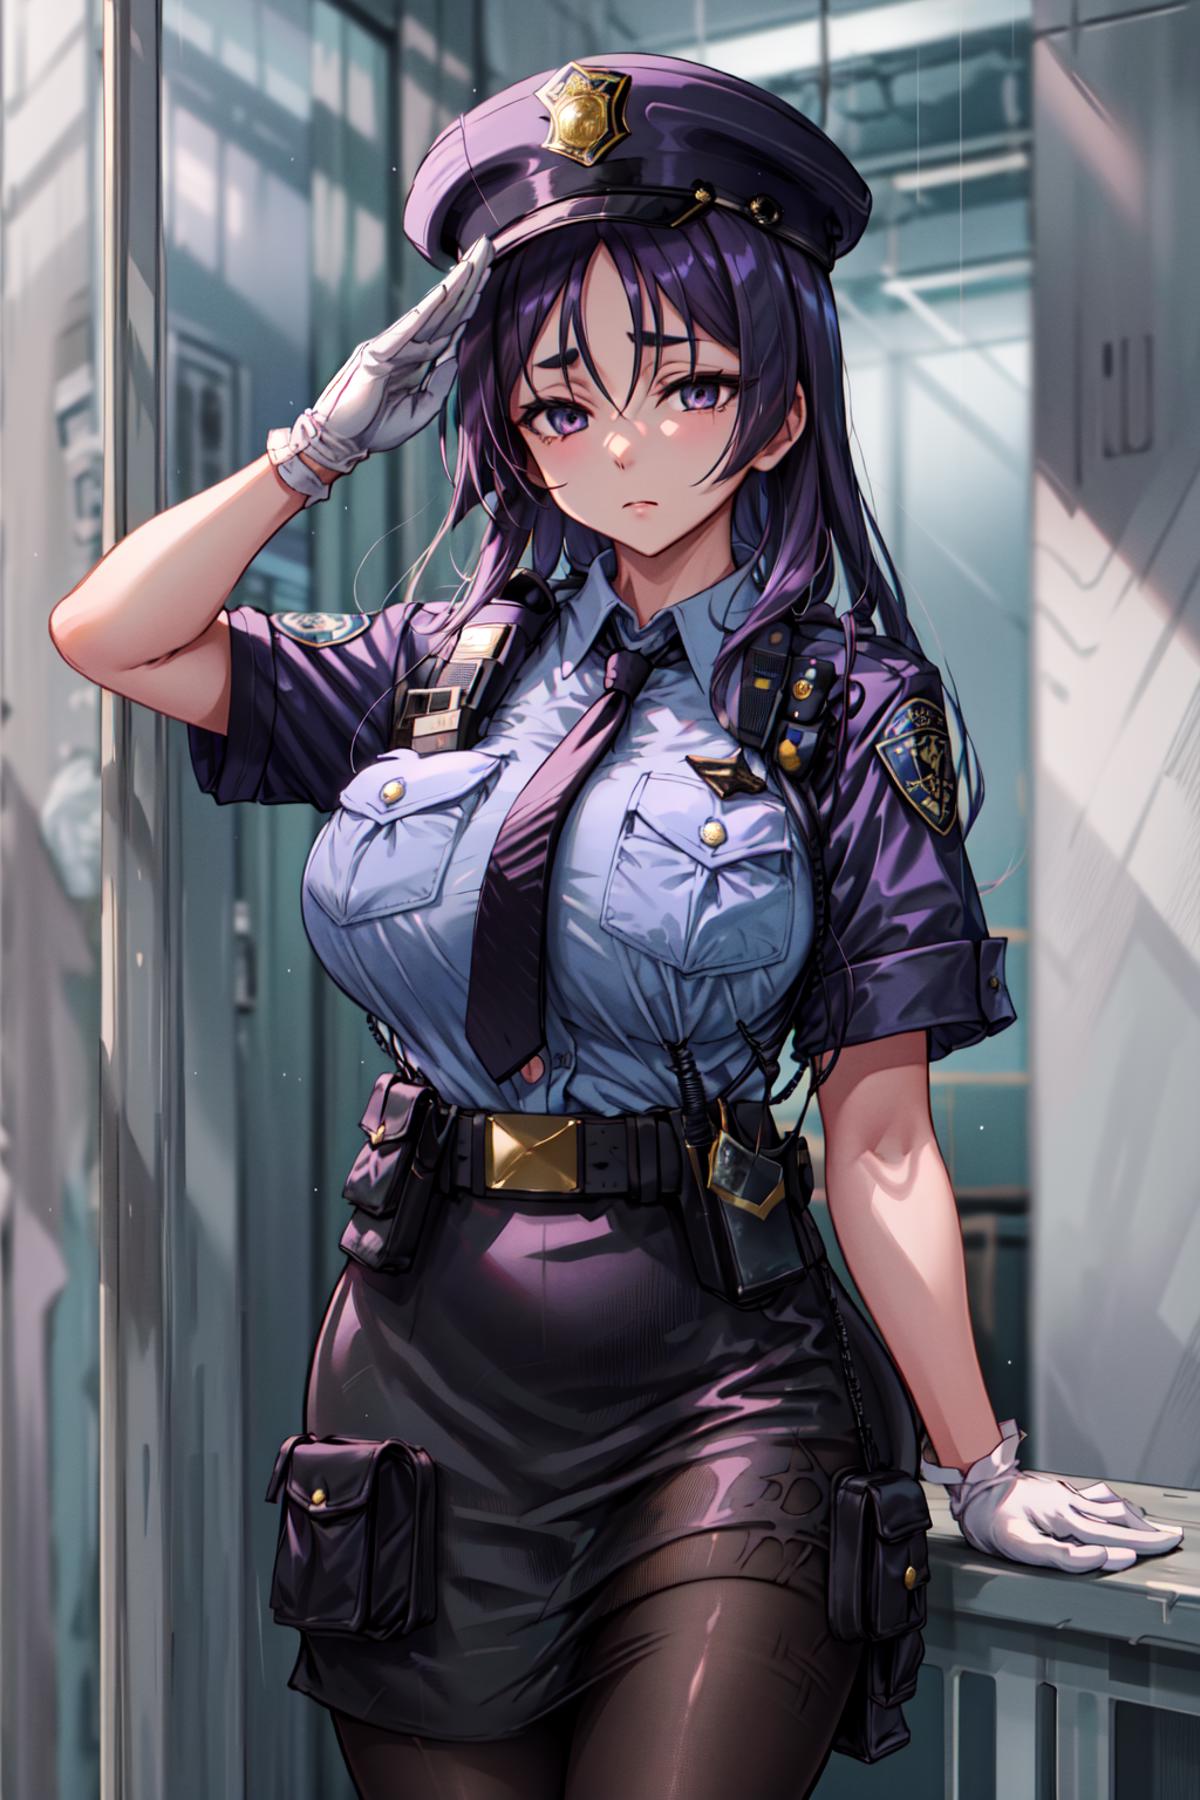 Change-A-Character: Good Cop, Your Waifu Upholds The Law! image by UnknownNo3